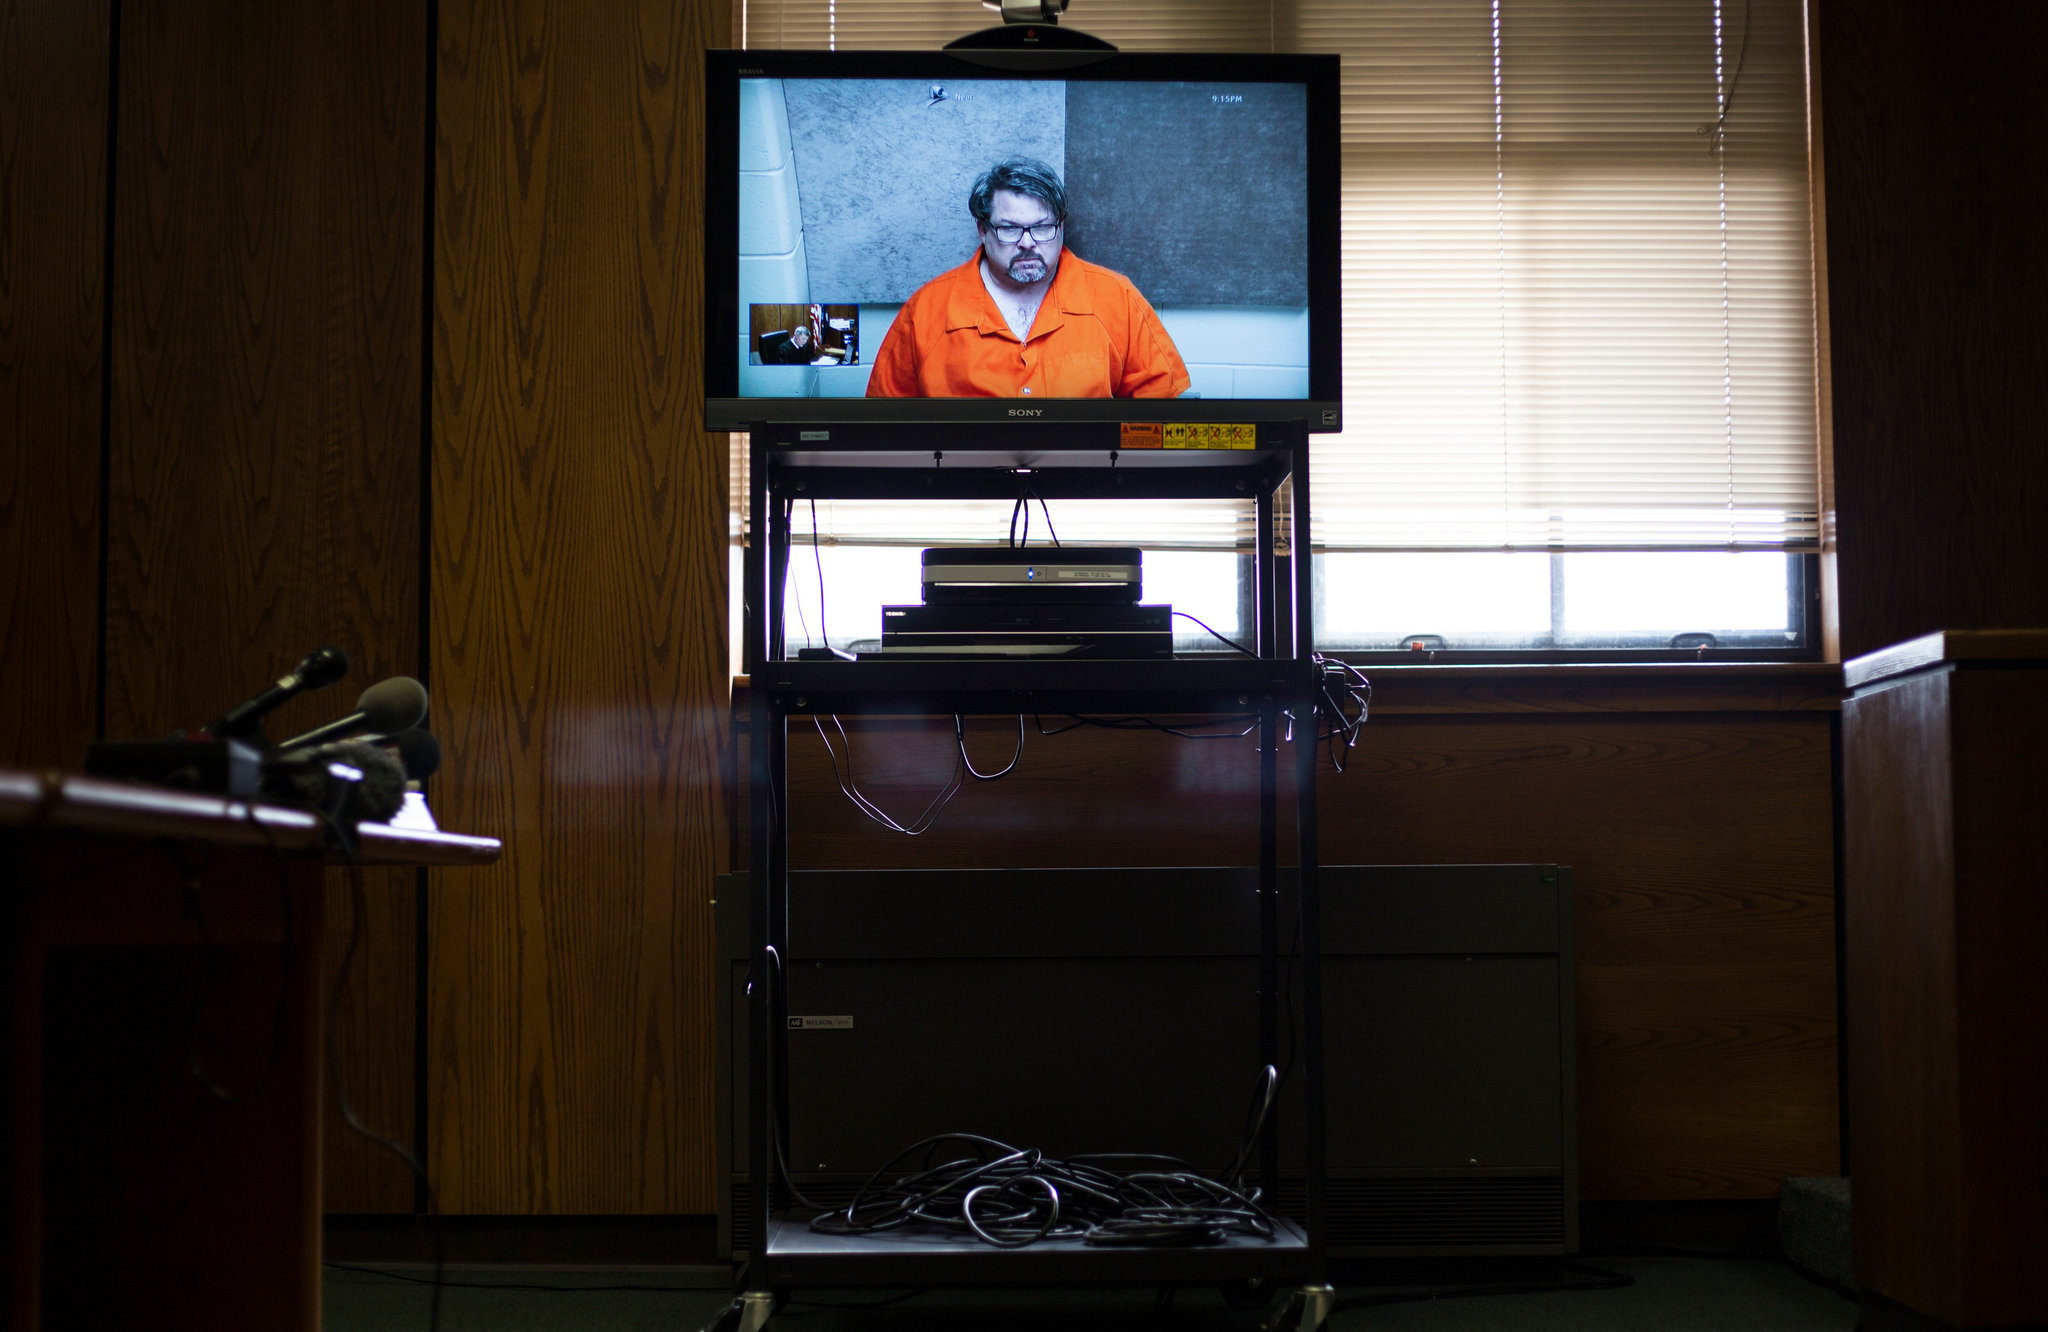 Jason B. Dalton, the suspect in the fatal shootings in Kalamazoo, Mich., appeared for his arraignment in a video conference on Monday. Photo - New York Times - Brittany Greeson